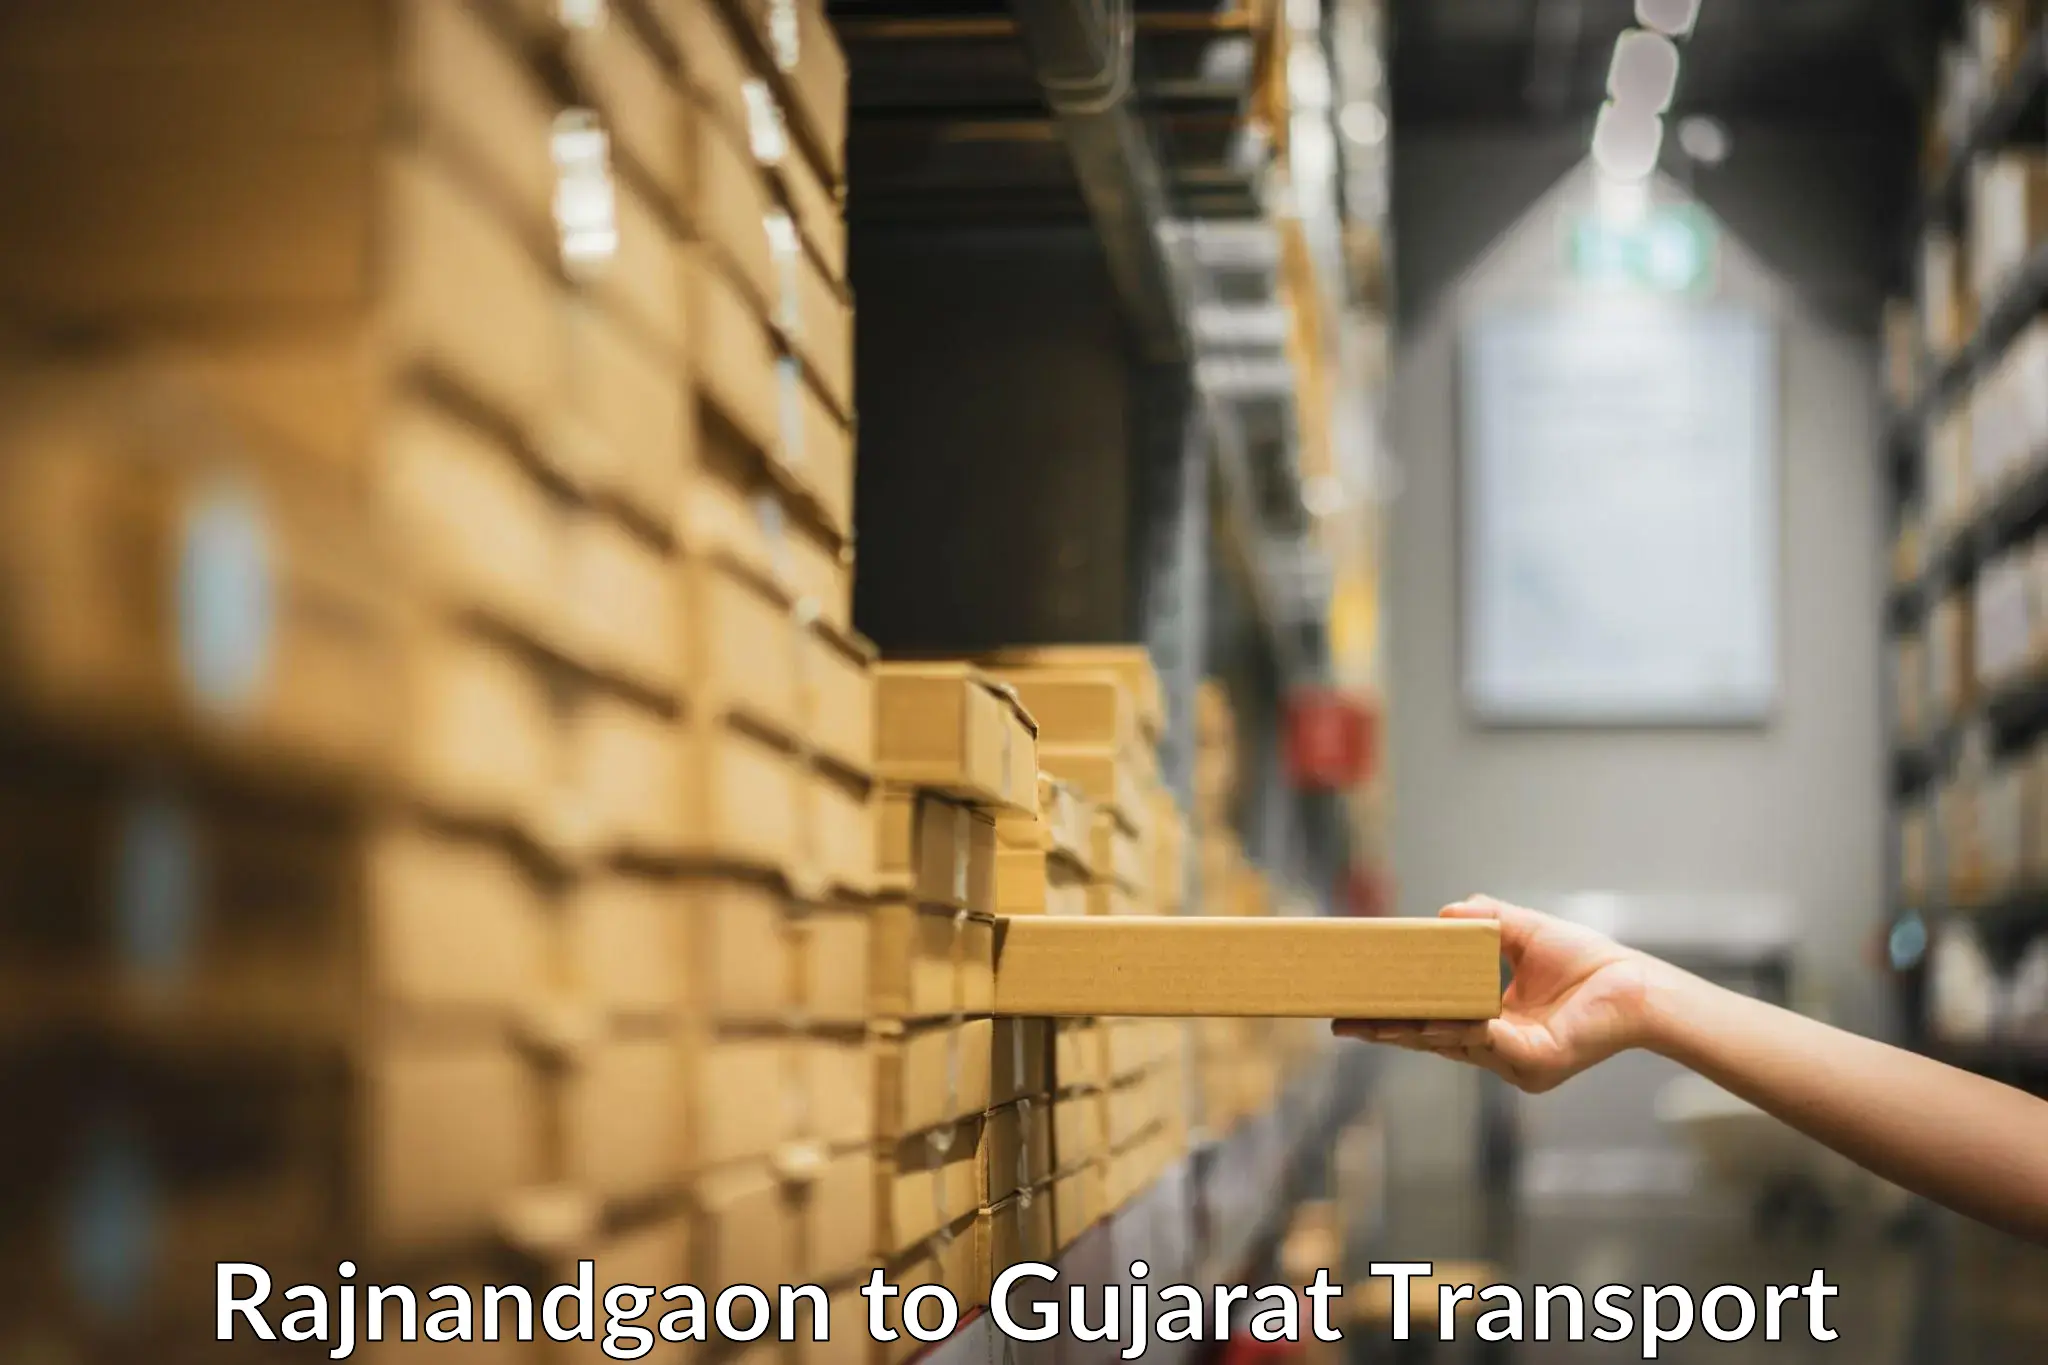 Commercial transport service Rajnandgaon to Dwarka